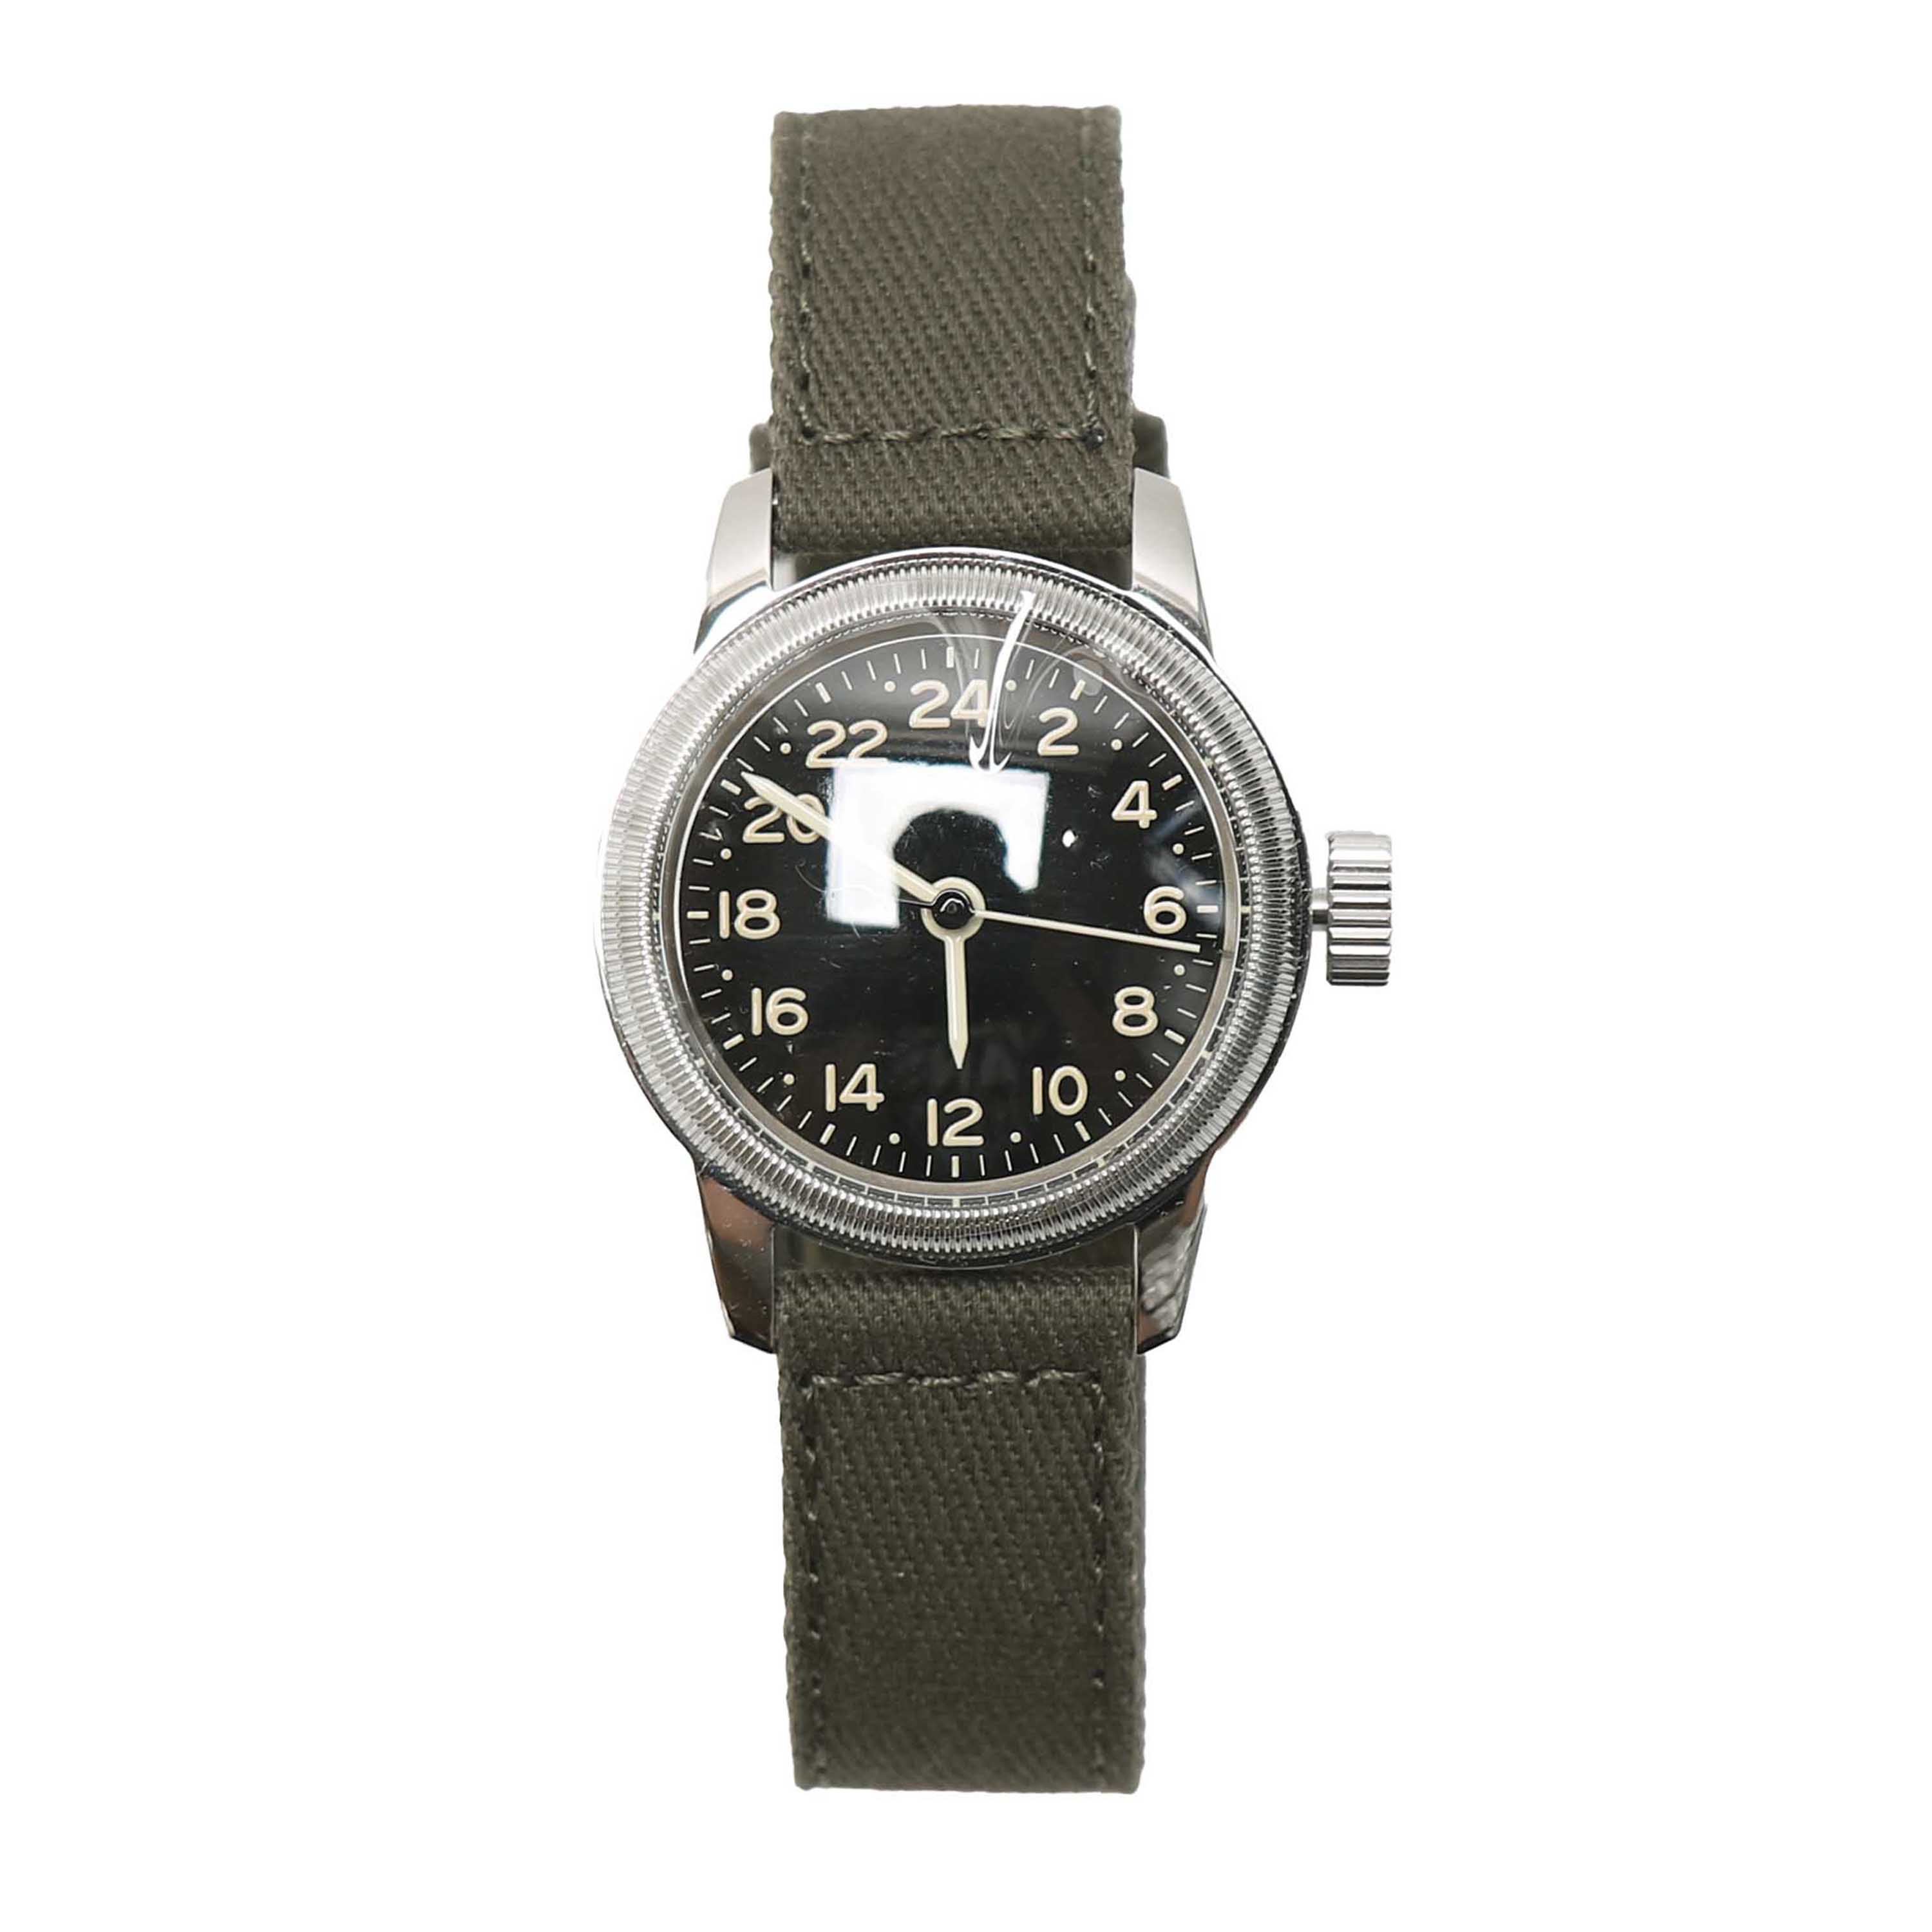 TYPE A-11 24 HOUR MOVEMENT BLACK DIAL